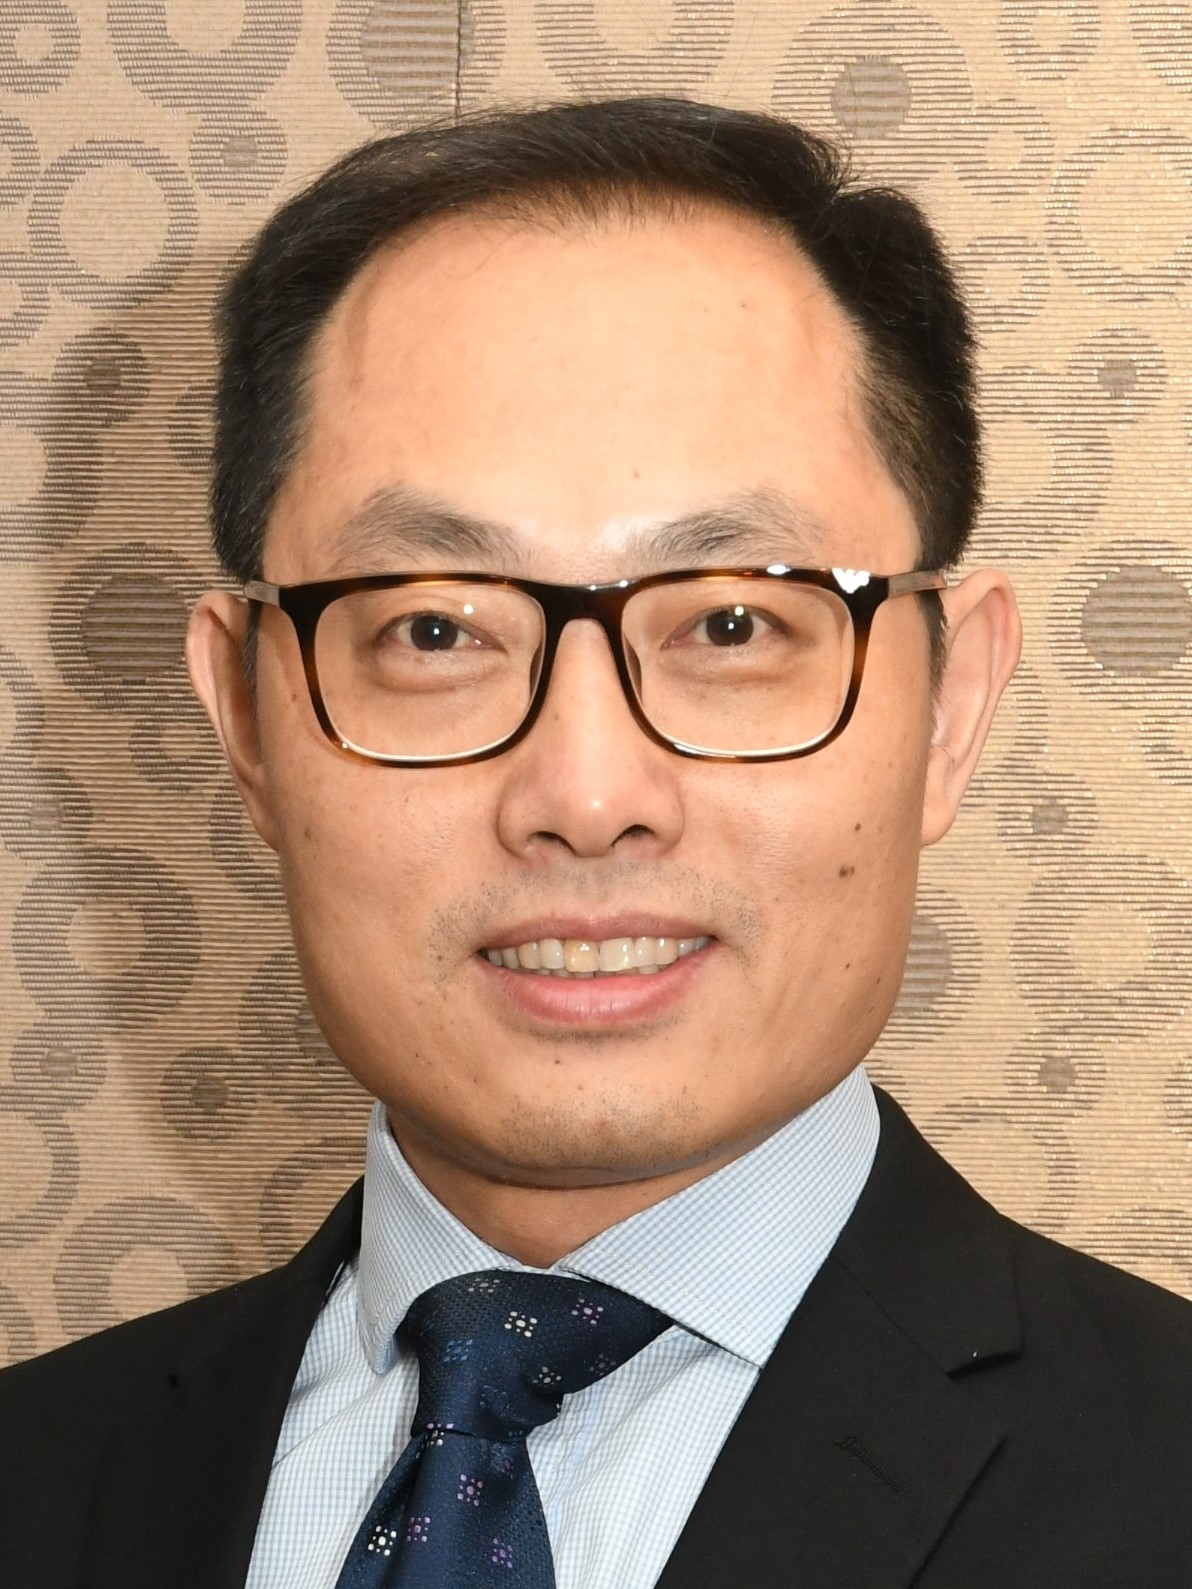 A headshot of smiling Zhang Jianlin who has short black hair. He is wearing glasses with a black frame, a black suit with a light blue collared shirt, and a navy-blue tie.